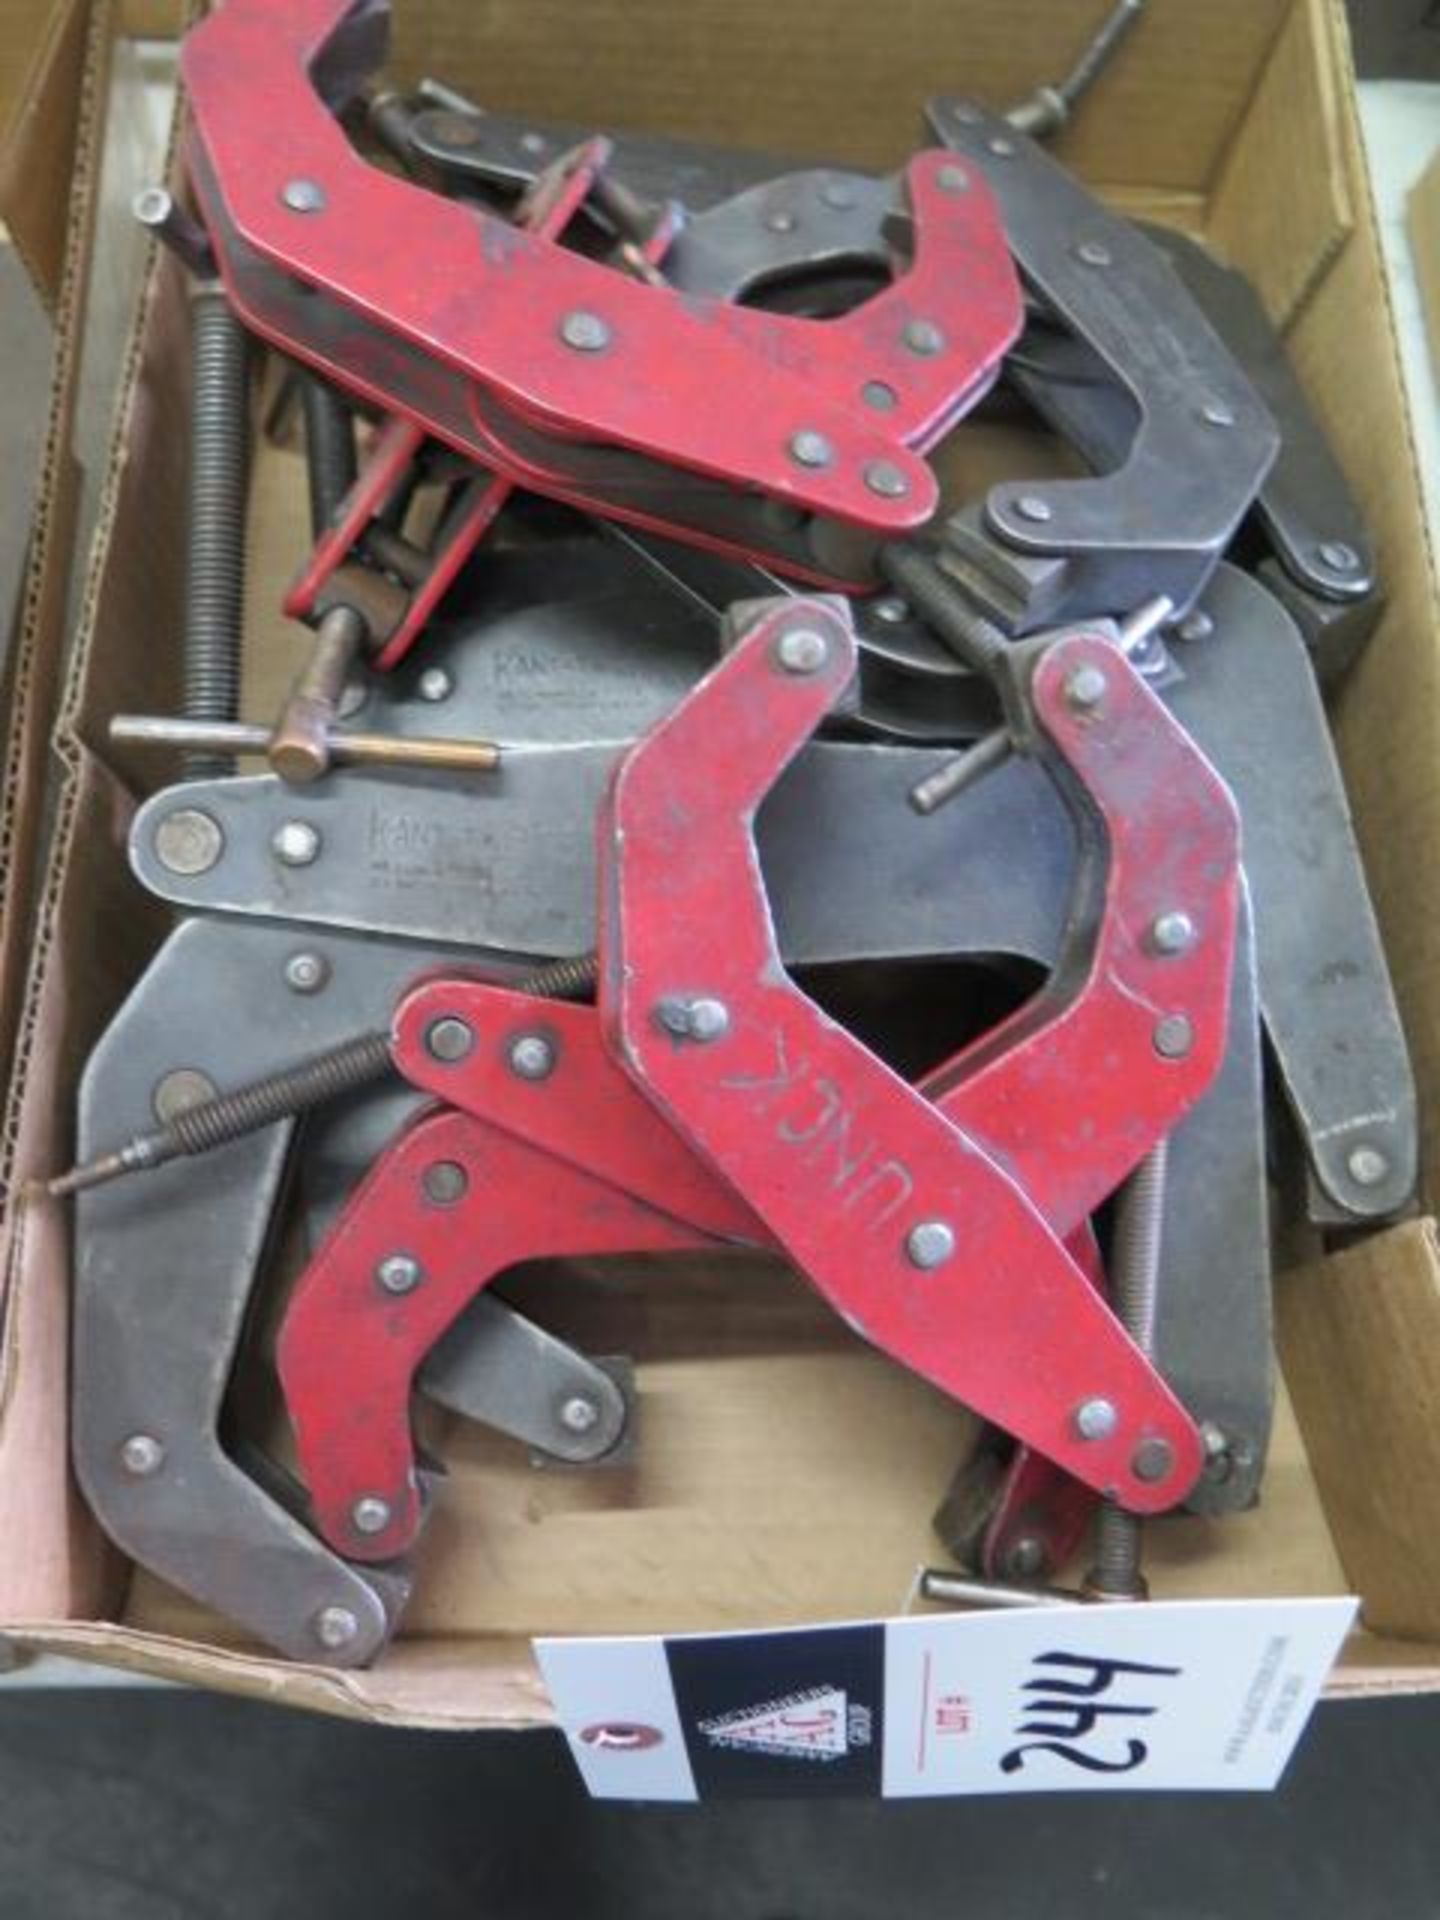 Kant-Twist Clamps (SOLD AS-IS - NO WARRANTY)